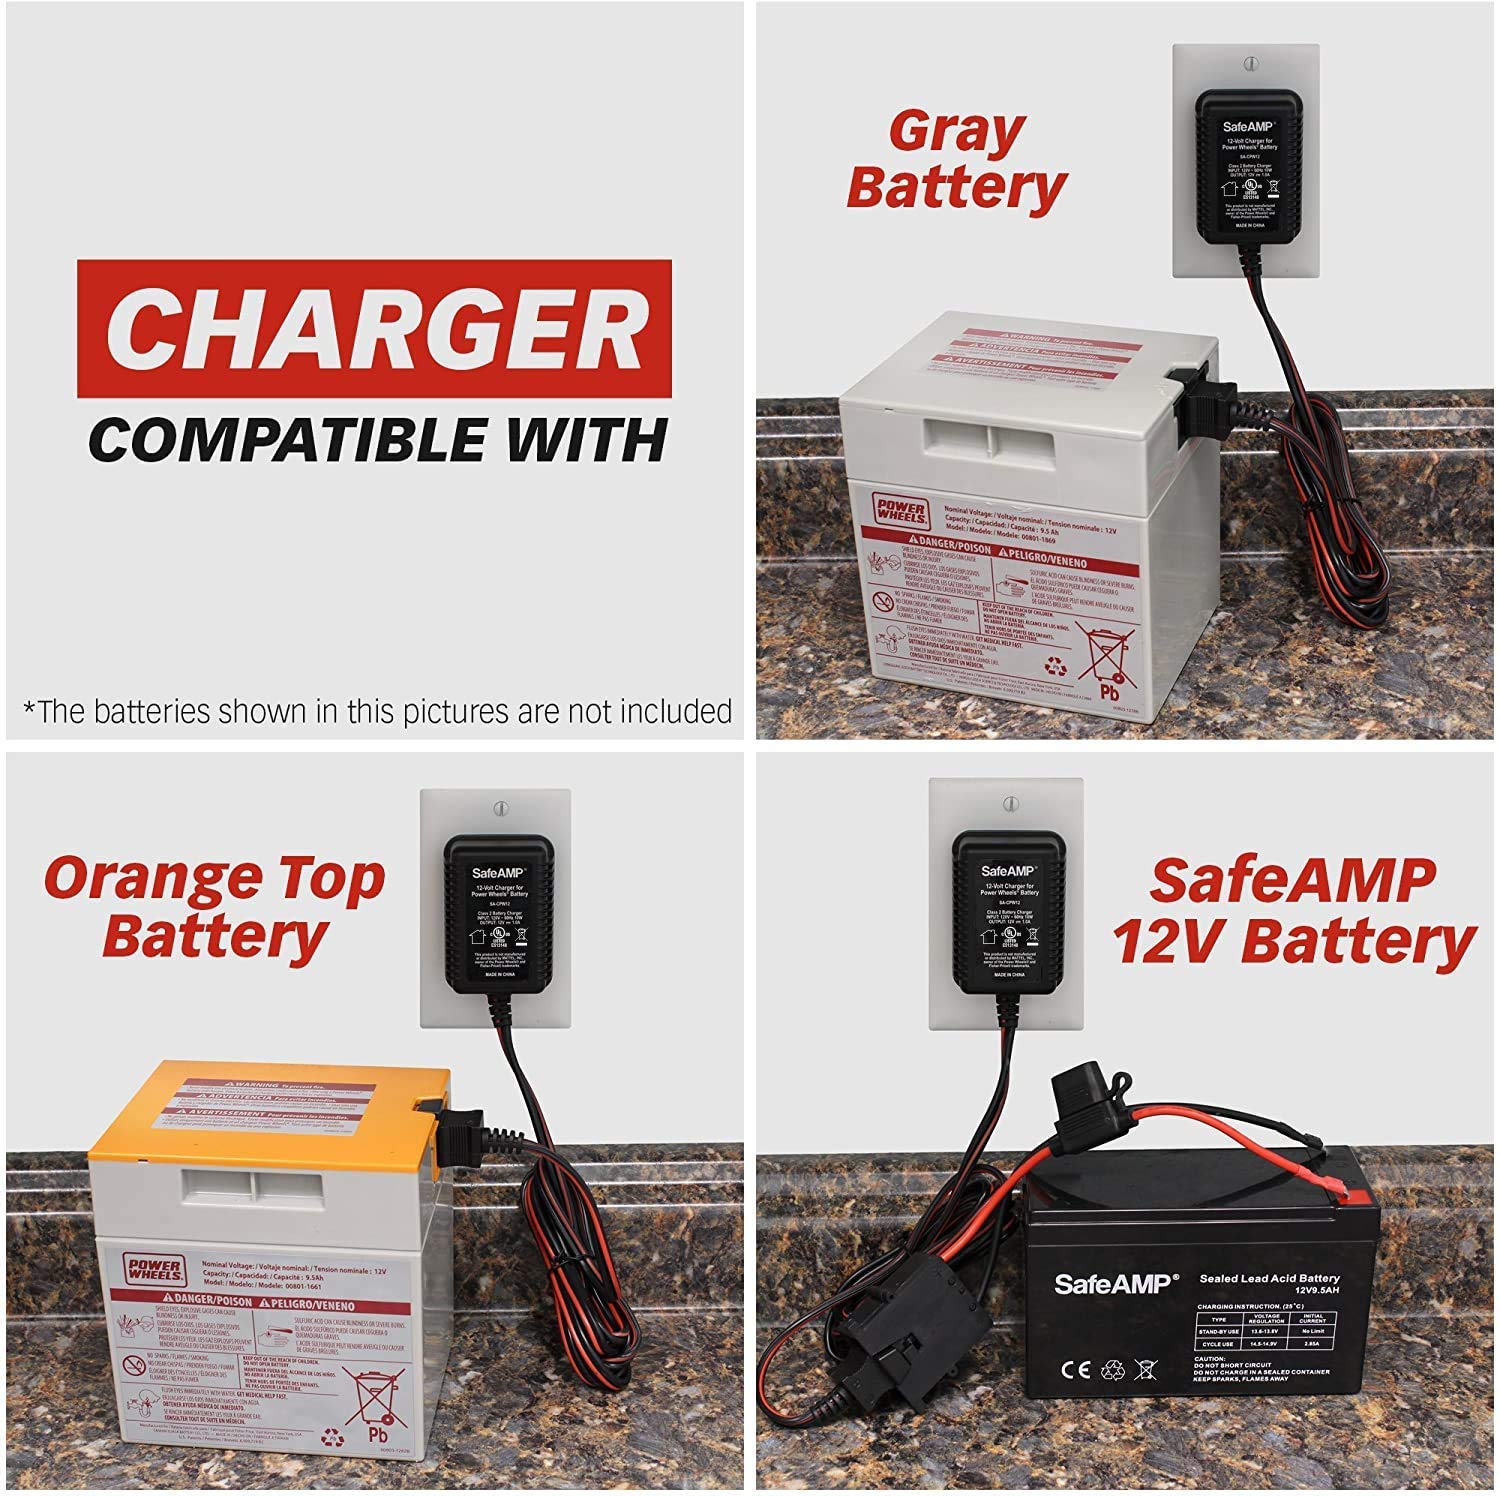 SafeAMP 12-Volt Charger for Power Wheels Gray Battery and Orange Top Battery